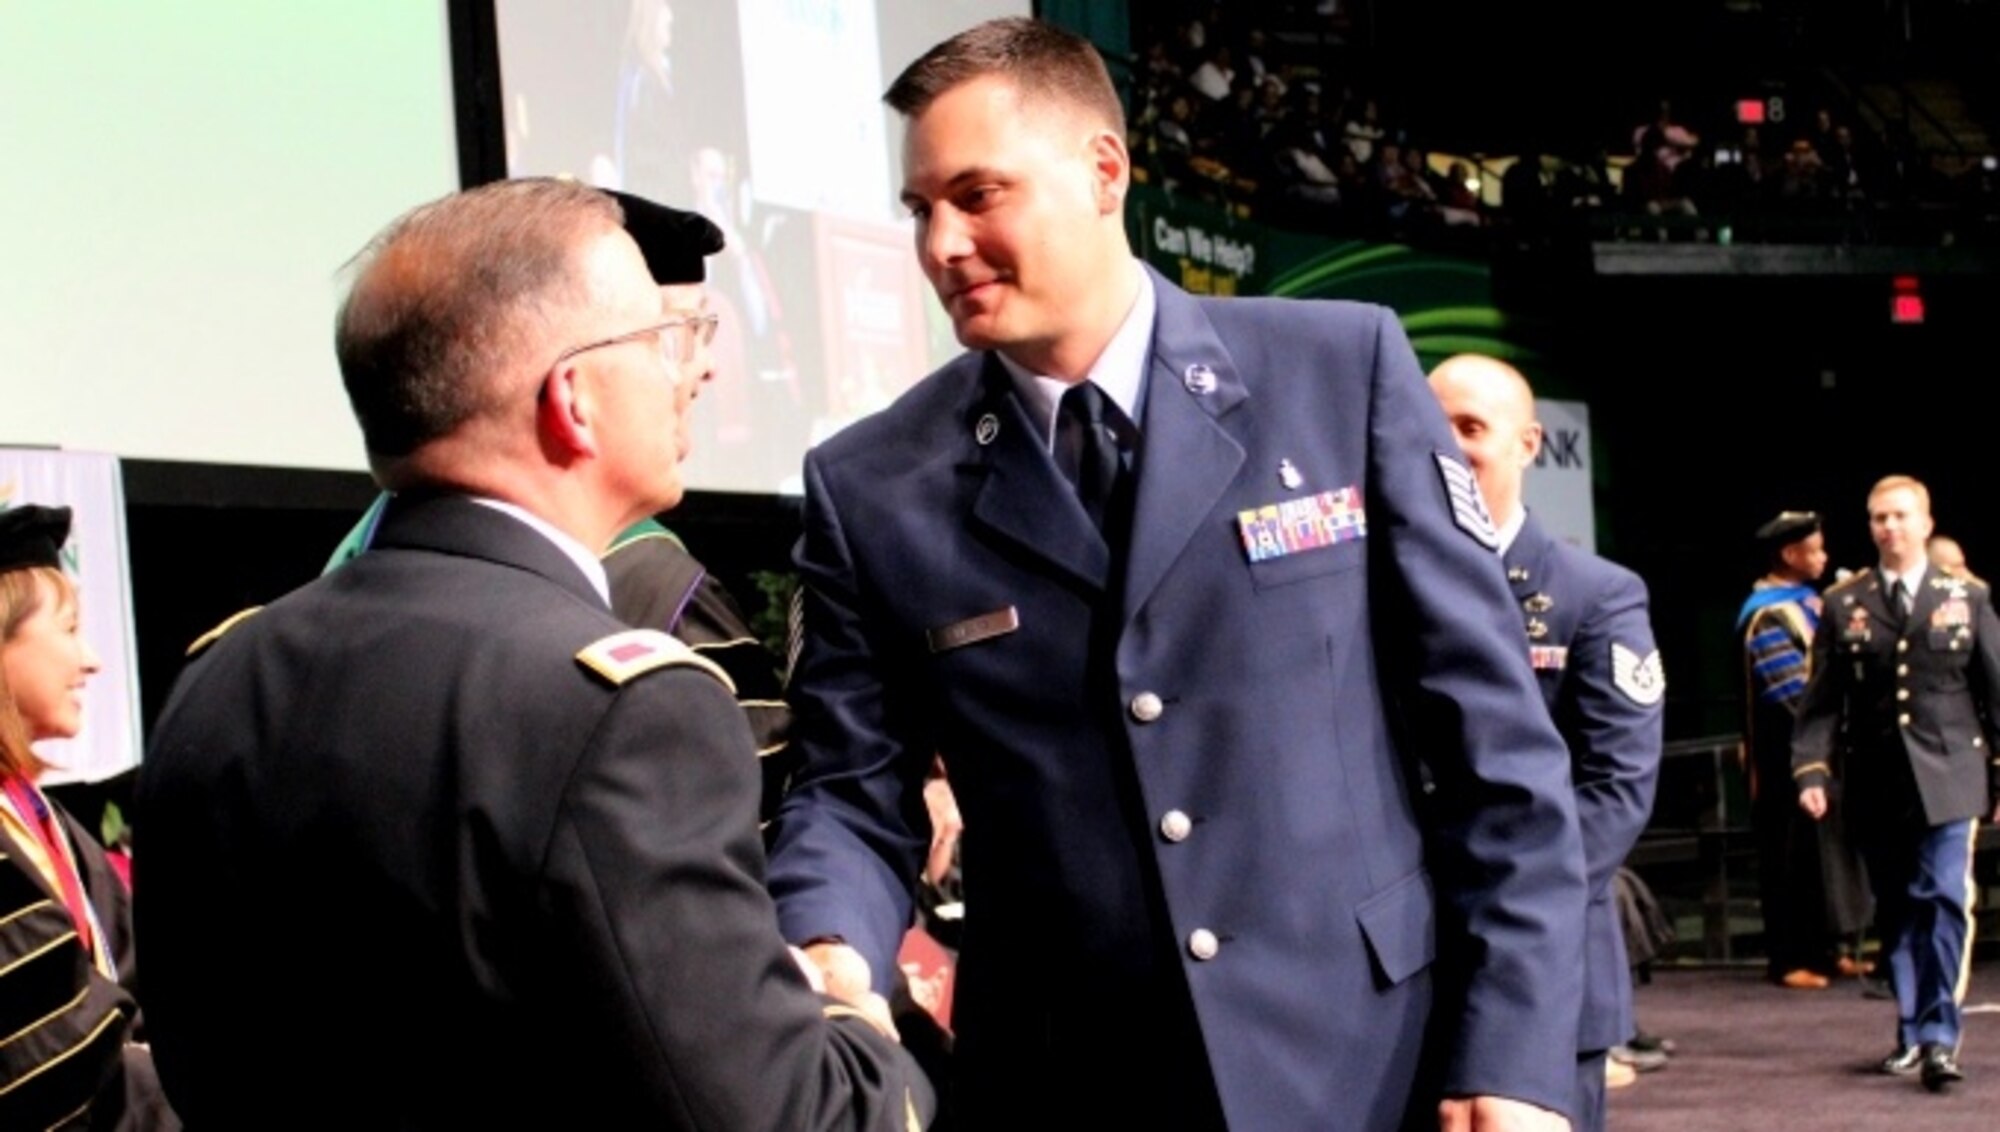 Tech. Sgt. Jeremy Mears crosses the stage at a commencement ceremony held at George Mason University on May 11, 2016, as he graduates from the Enlisted to Medical Degree Preparatory Program. The Enlisted to Medical Degree Preparatory Program is a partnership between the Armed Services and Uniformed Services University. Designed for enlisted service members, the two-year program enables members to remain on active duty status while enrolled as full-time students in preparation for application to medical school. (U.S. Air Force photo by Prerana Korpe, AFMS Public Affairs)